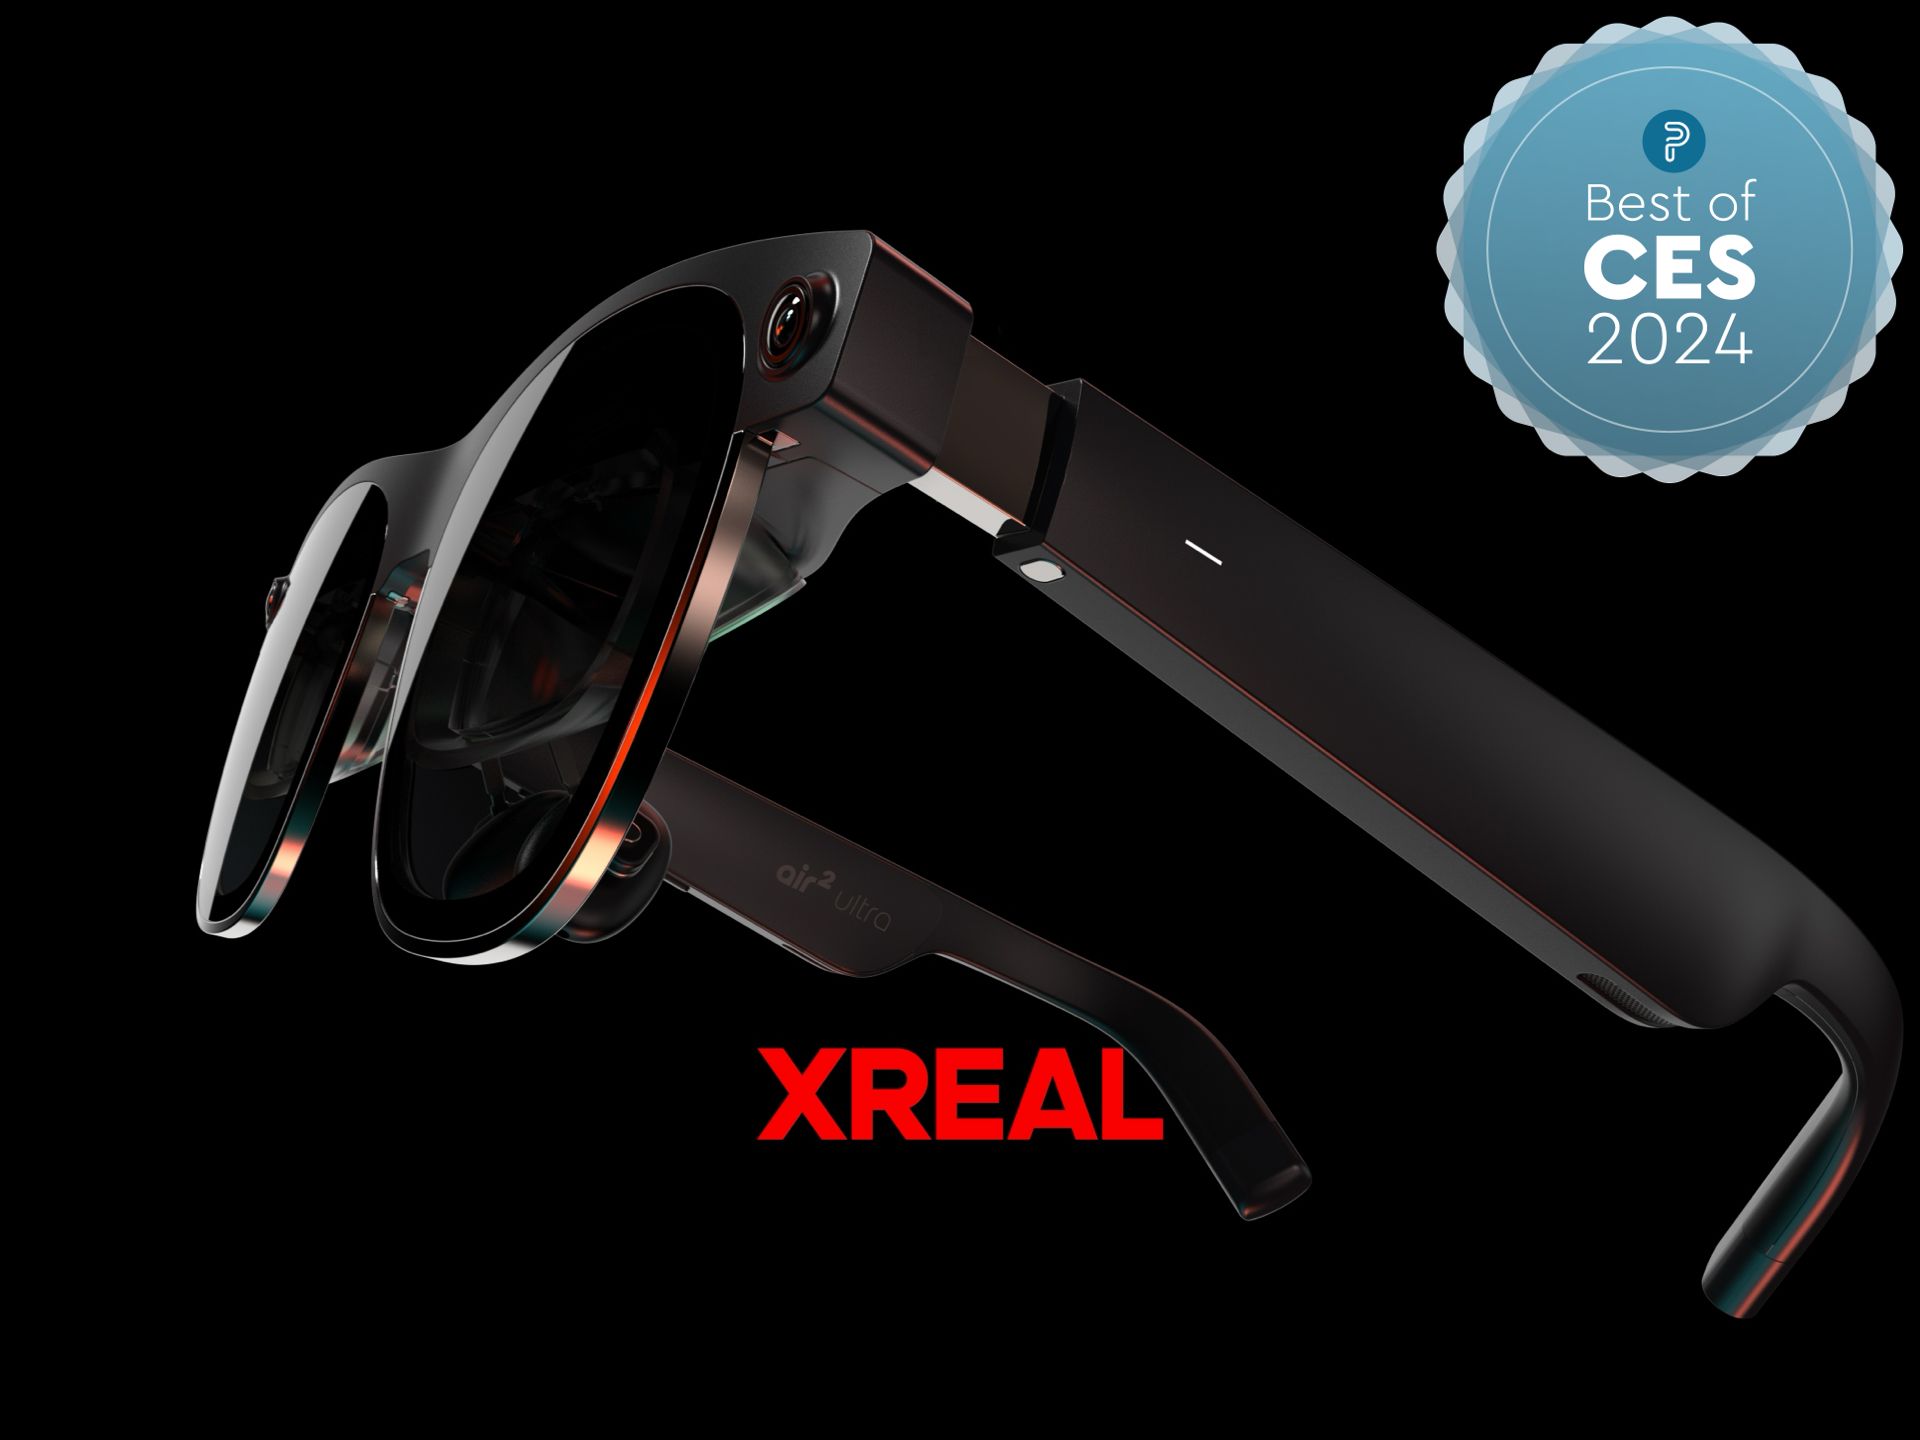 xreal best of ces 2024 pocketnow